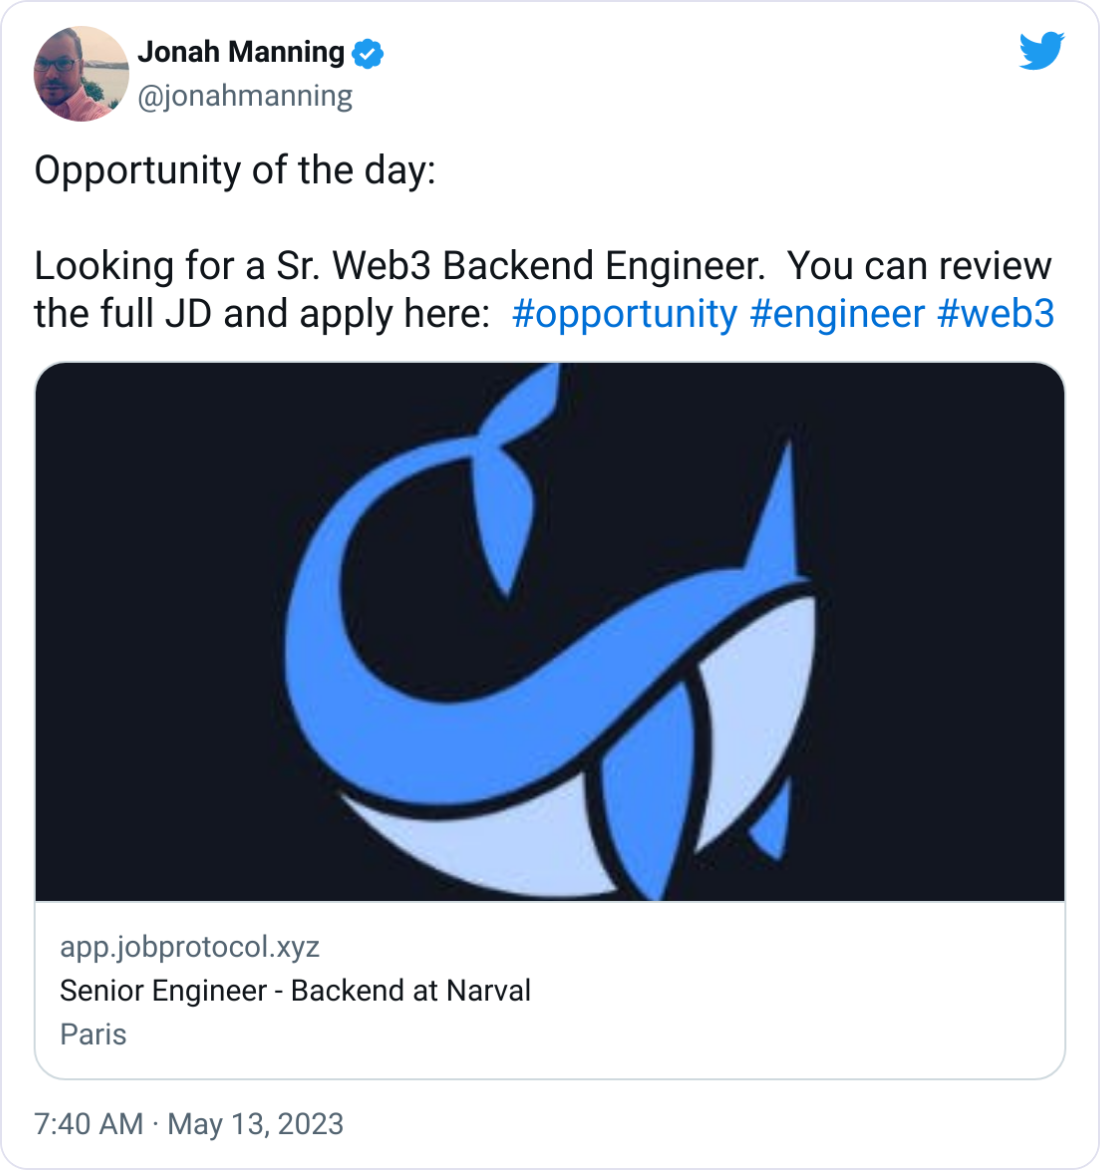 Jonah Manning @jonahmanning Opportunity of the day:  Looking for a Sr. Web3 Backend Engineer.  You can review the full JD and apply here:  #opportunity #engineer #web3